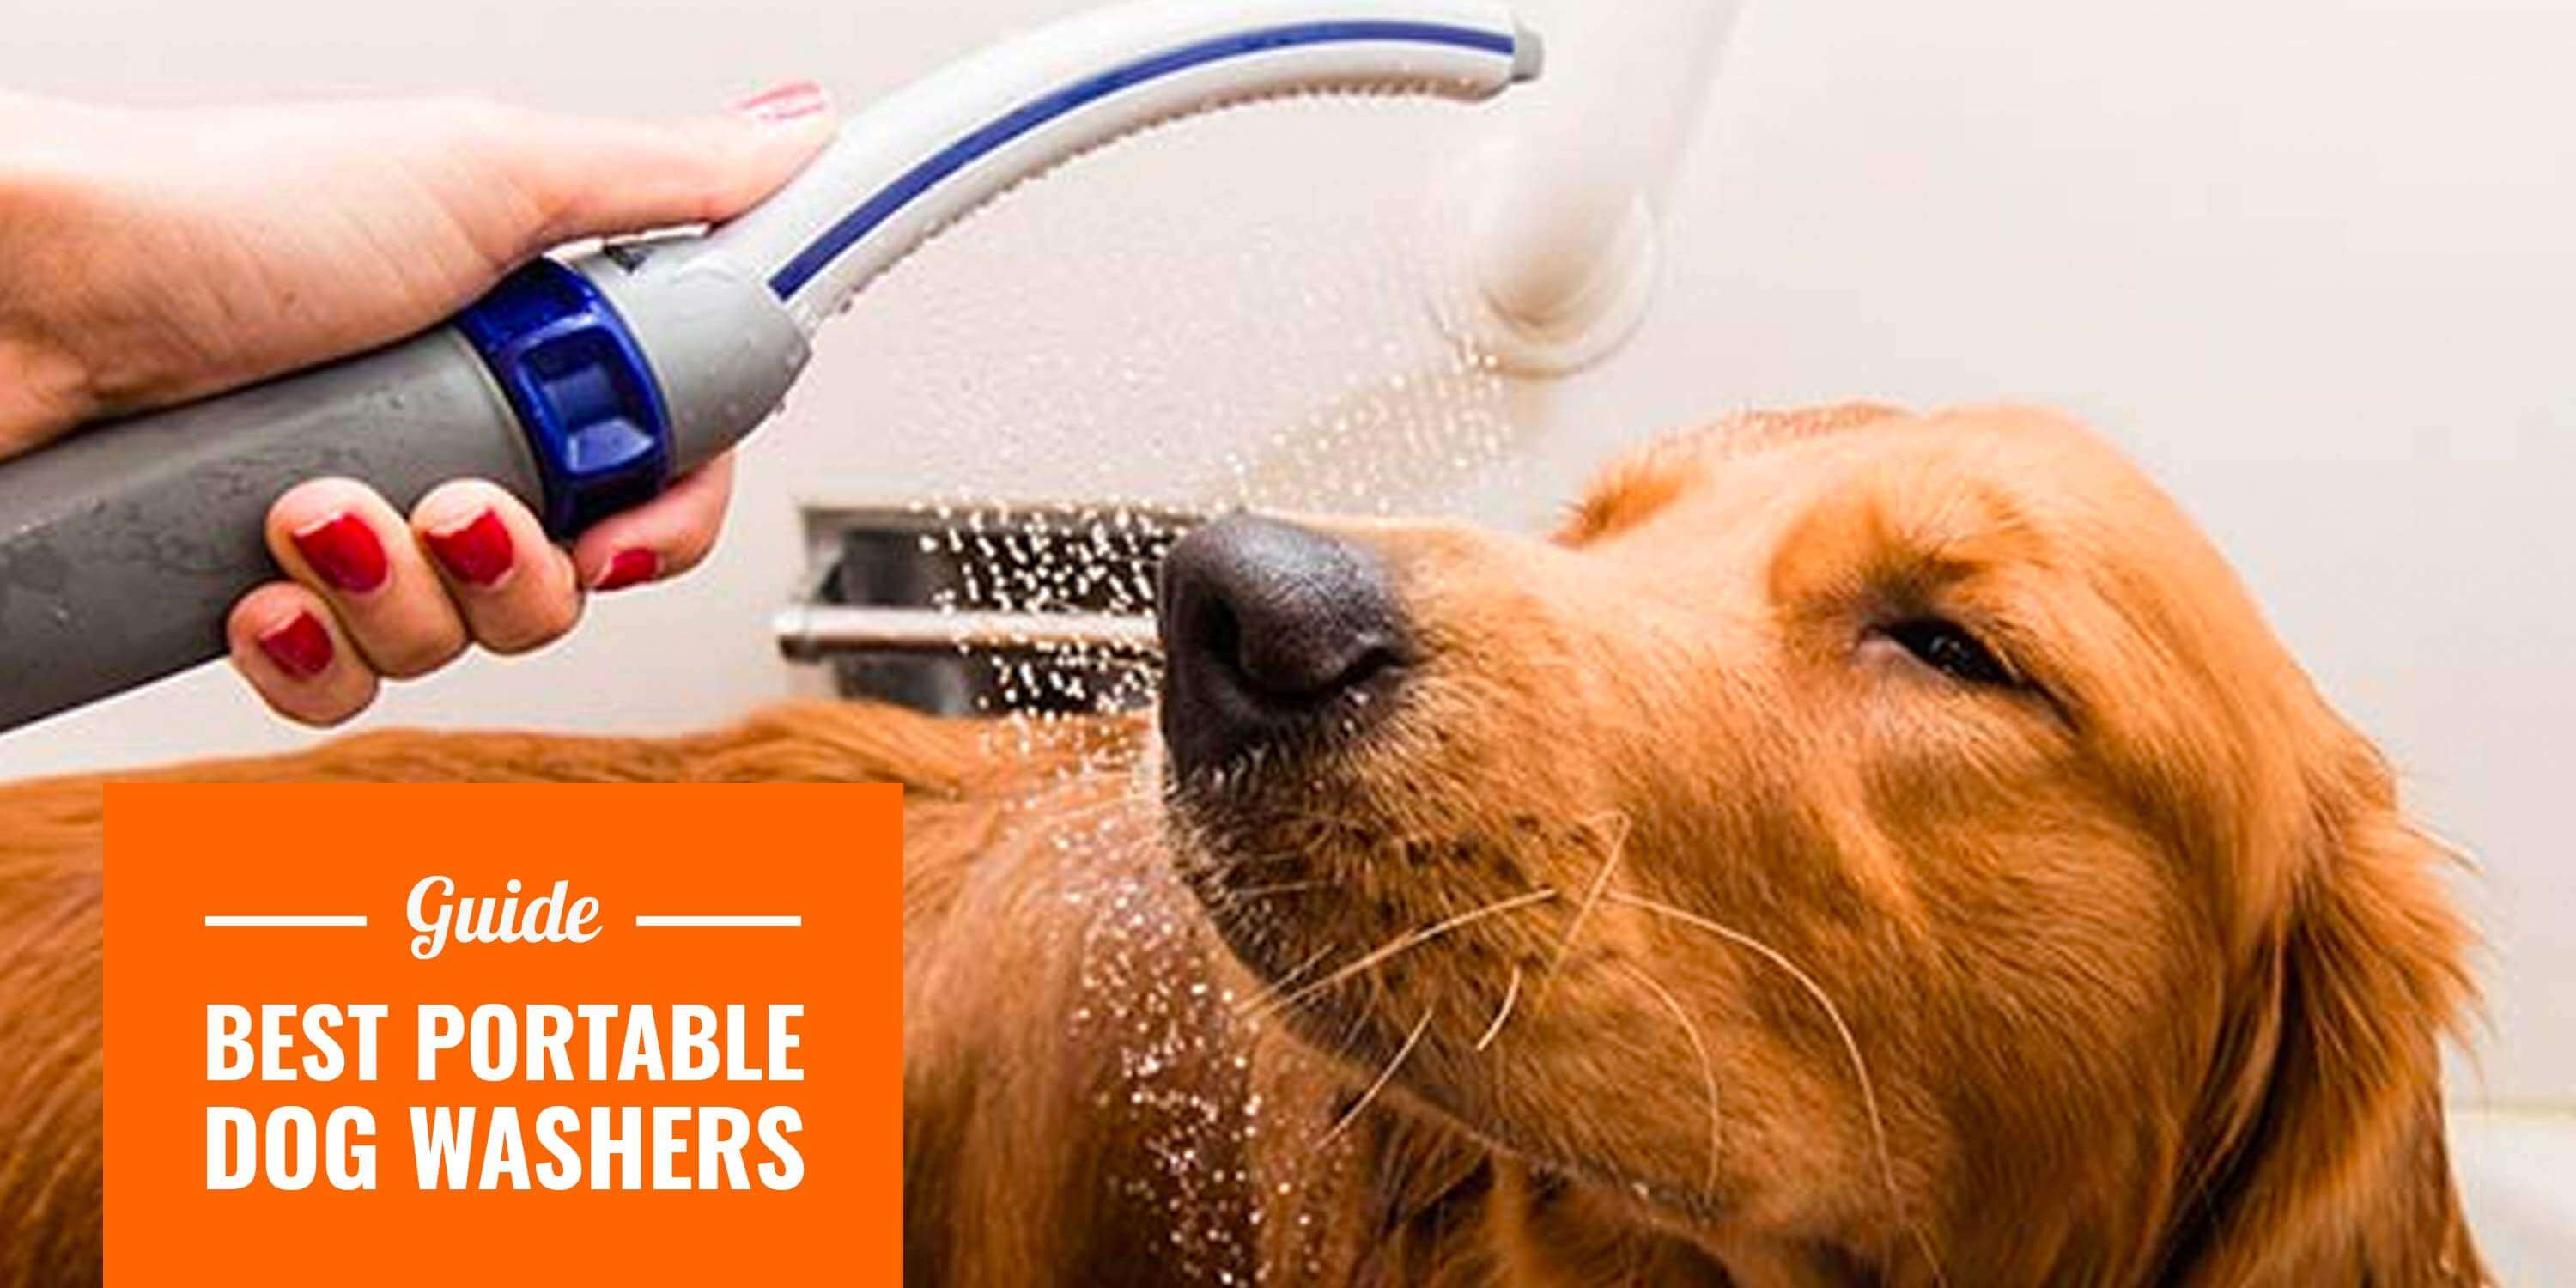 Top 5 Best Portable Dog Washers 